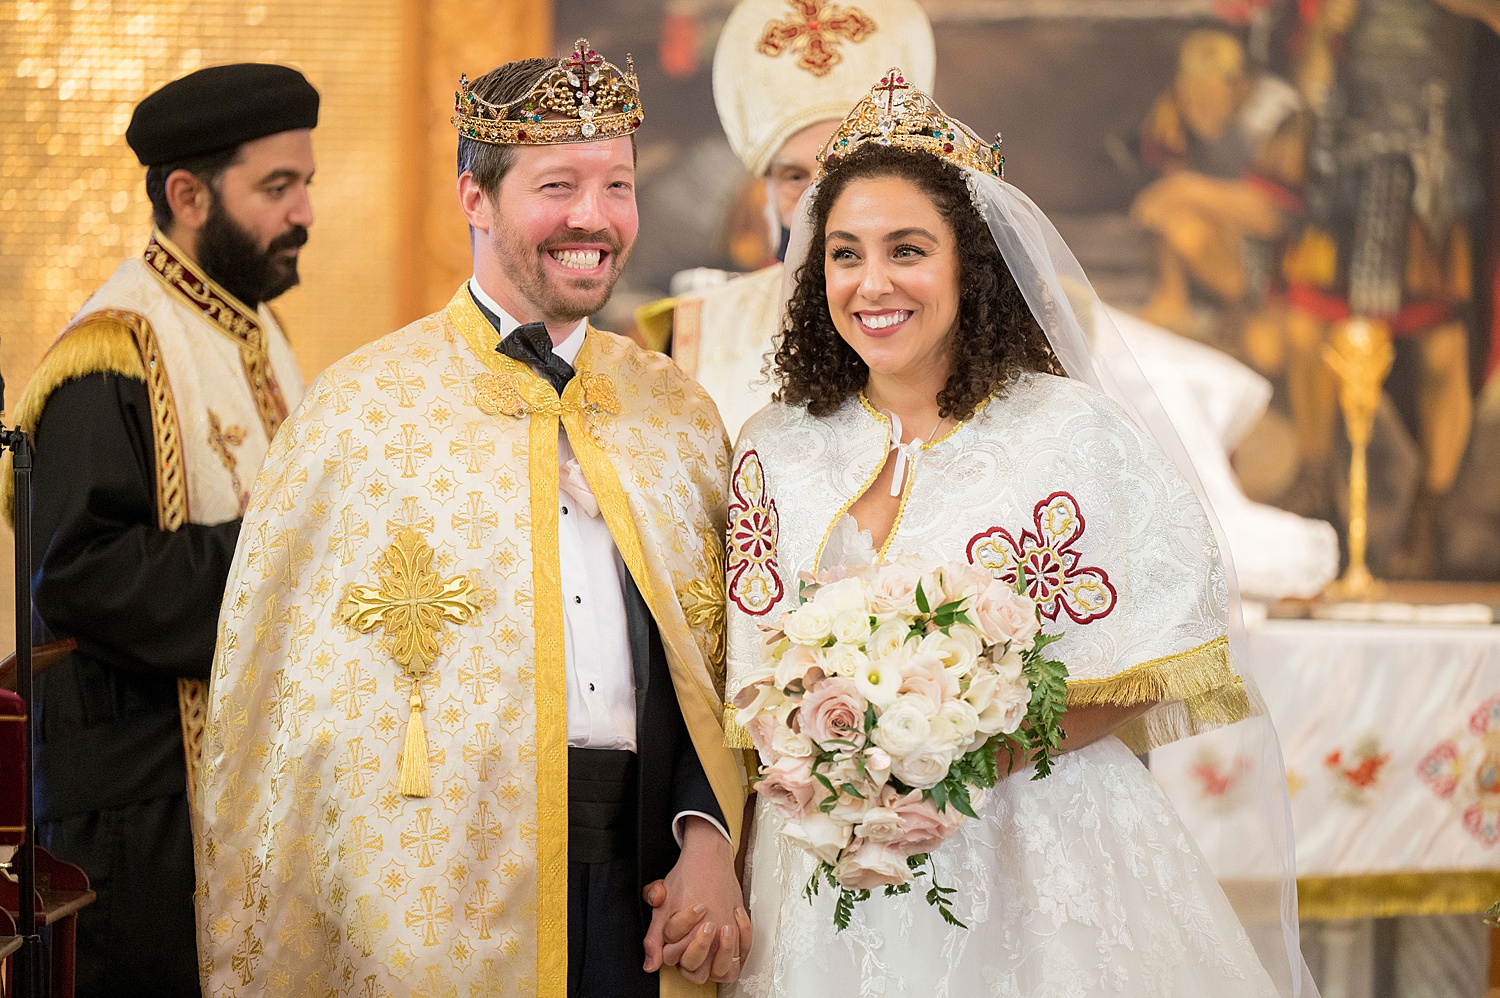 Happy bride and groom at their Coptic Orthodox wedding • Coptic Orthodox Ceremony: How to Photograph a Wedding at St Mary's Church in Ambridge Pittsburgh